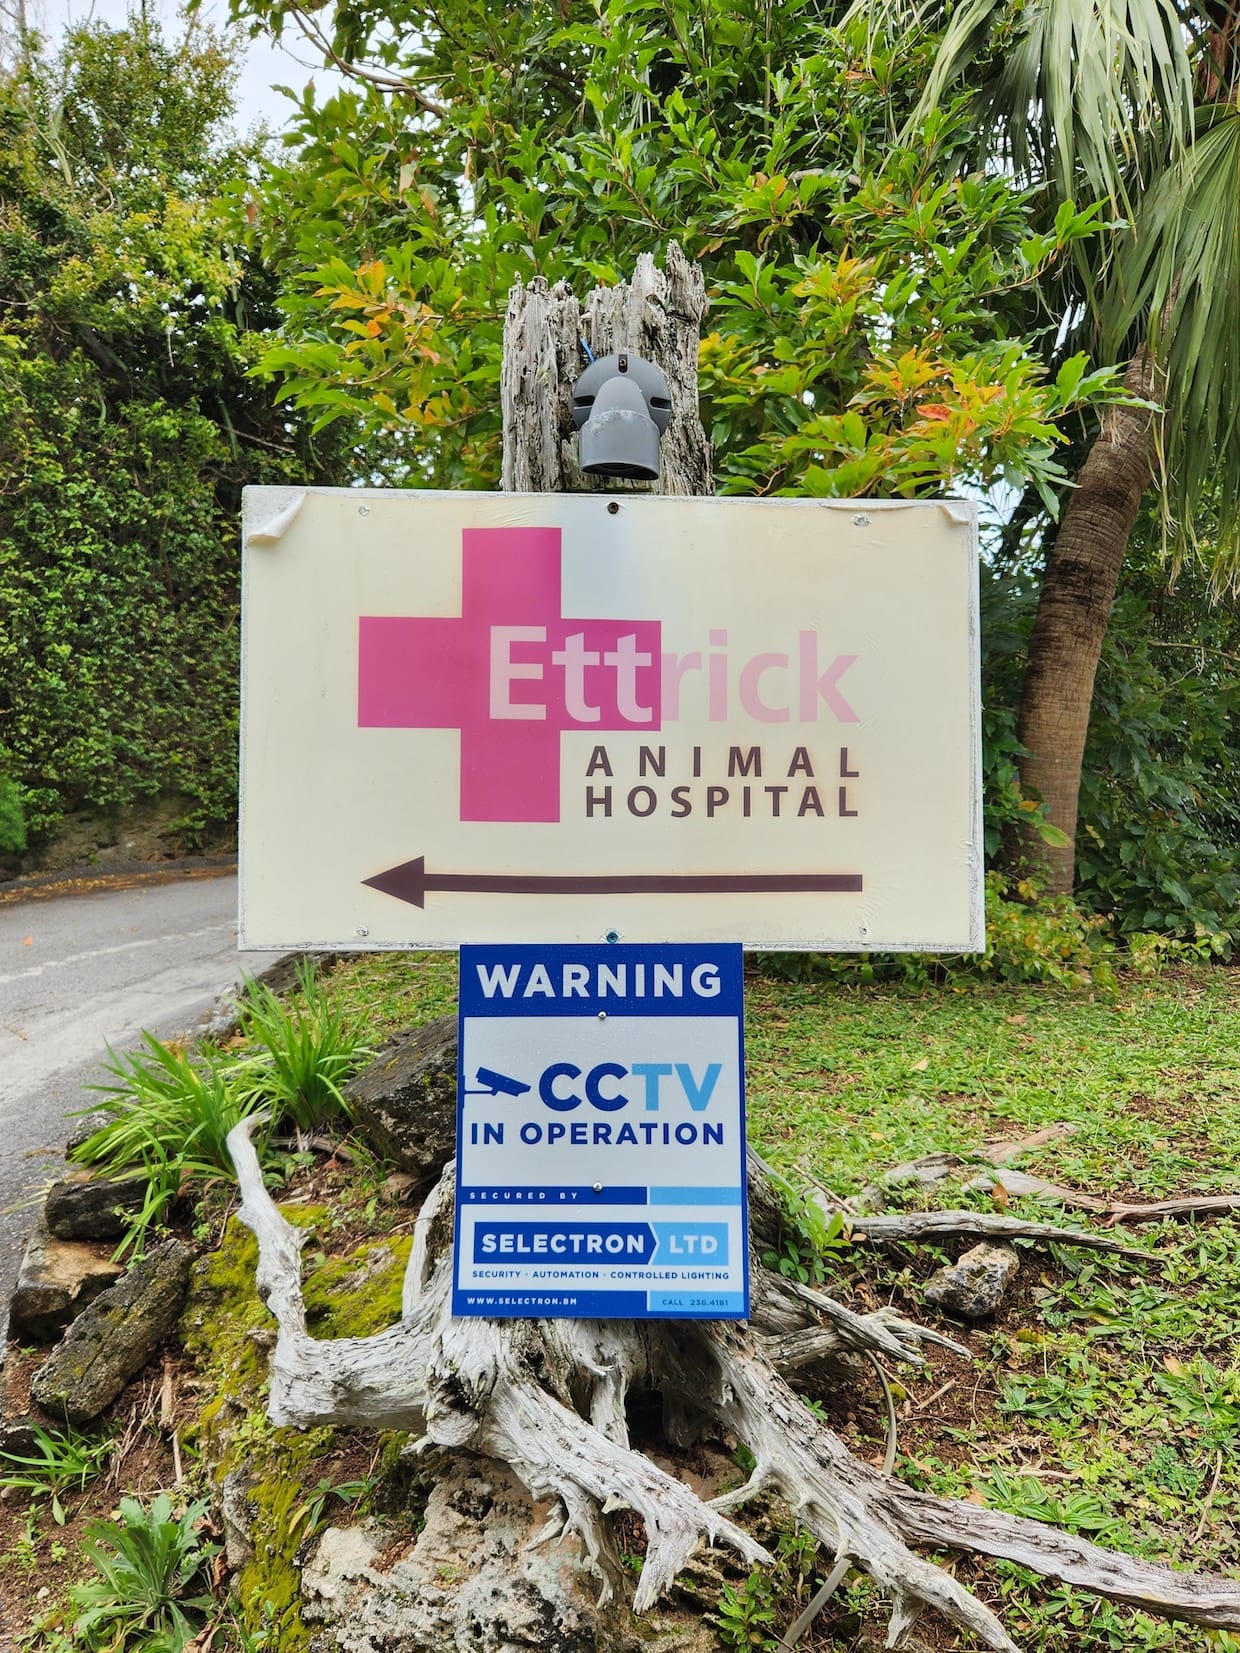 Ettrick Animal Hospital in Warwick Upgrade CCTV Camera System with Selectron